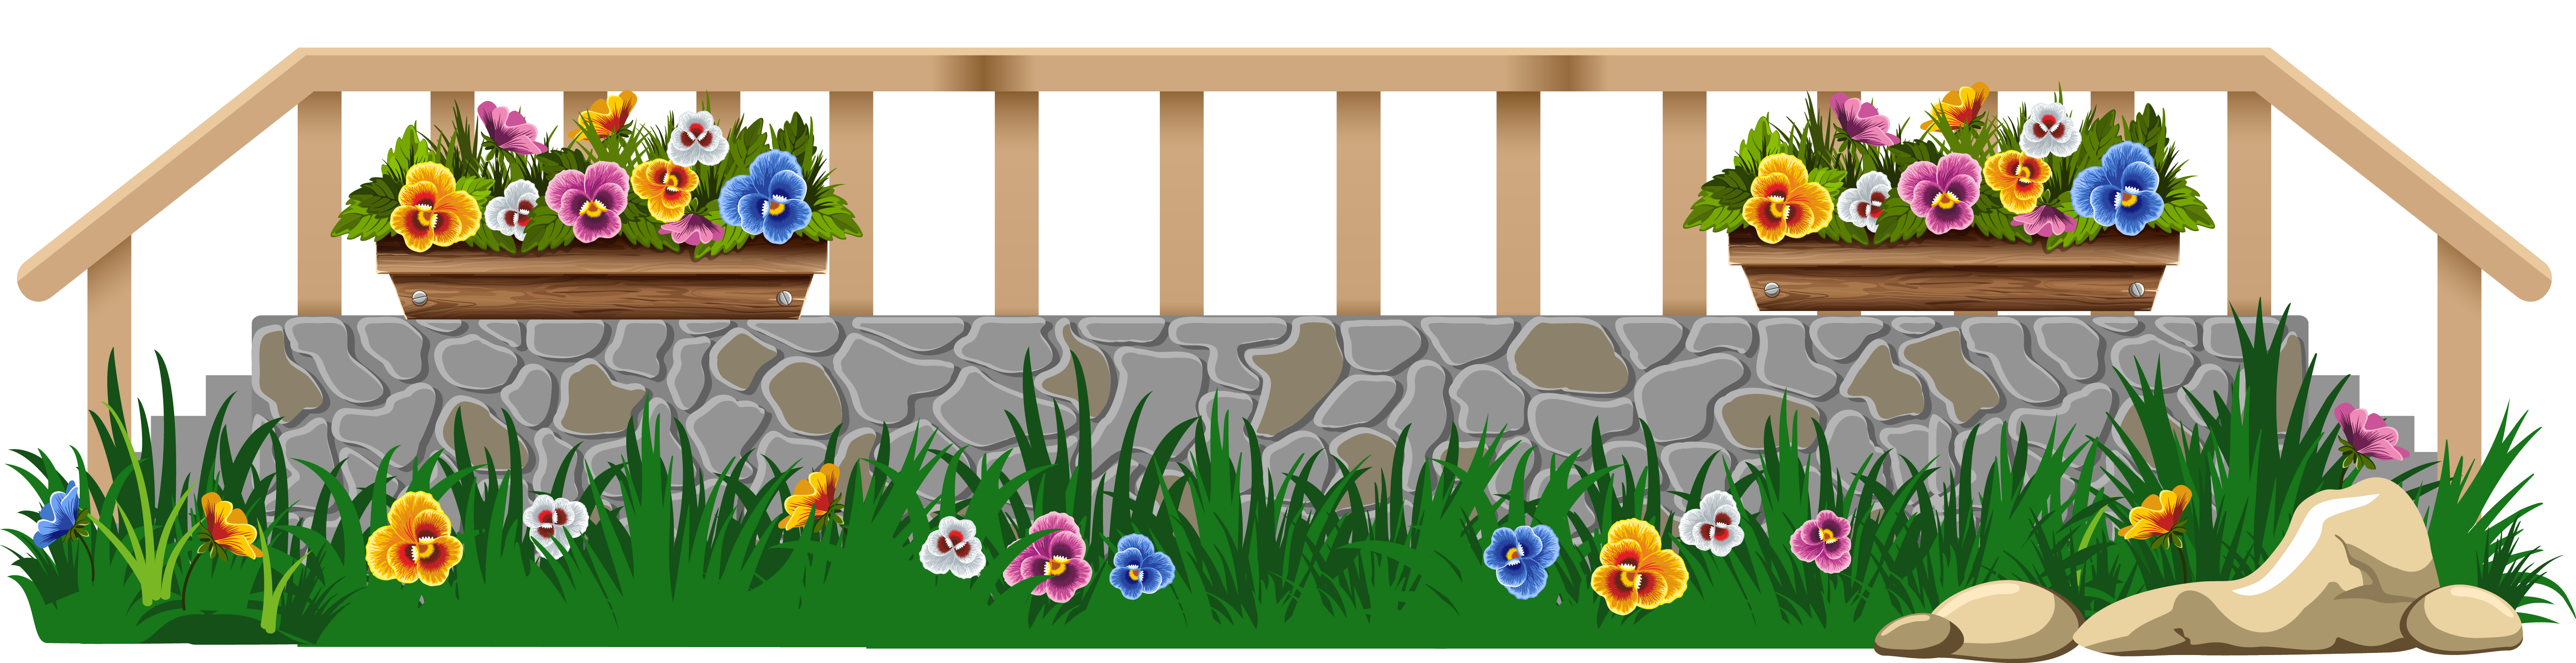 Grass clipart fence. With and flowers png